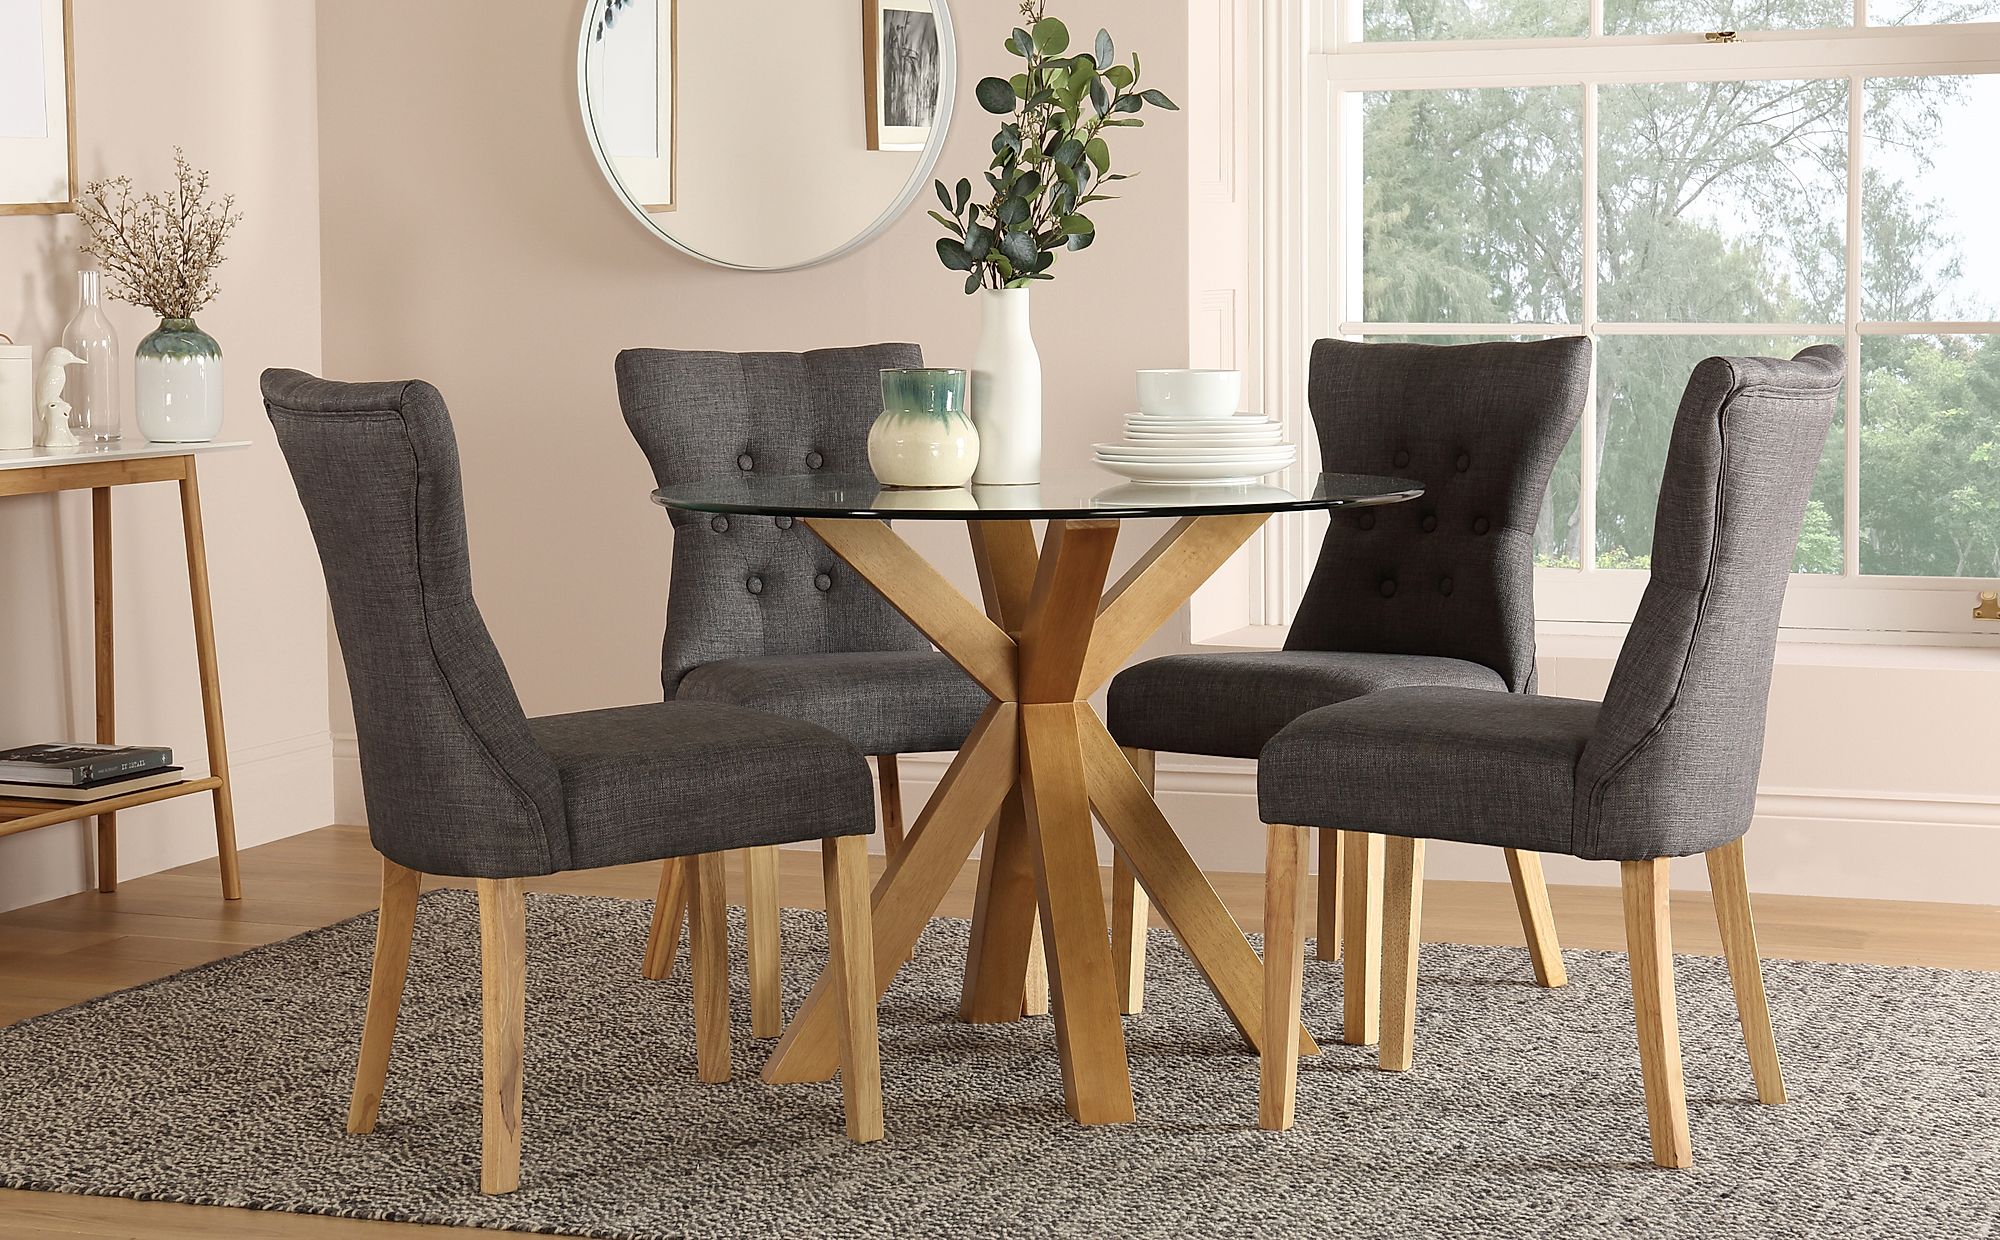 Glass Dining Room Table Sets Uk